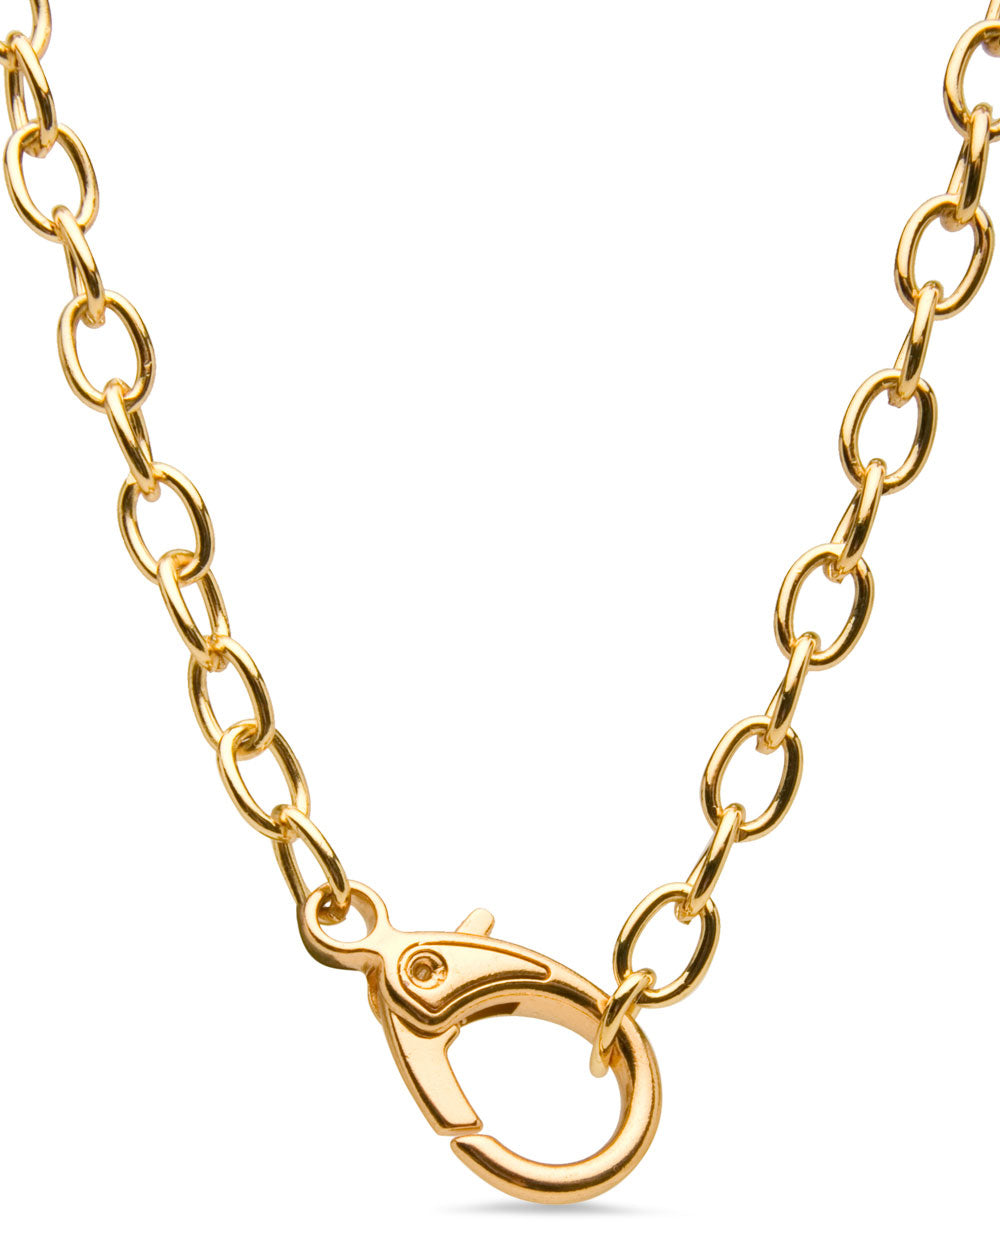 Lobster Clasp Chain Link Necklace